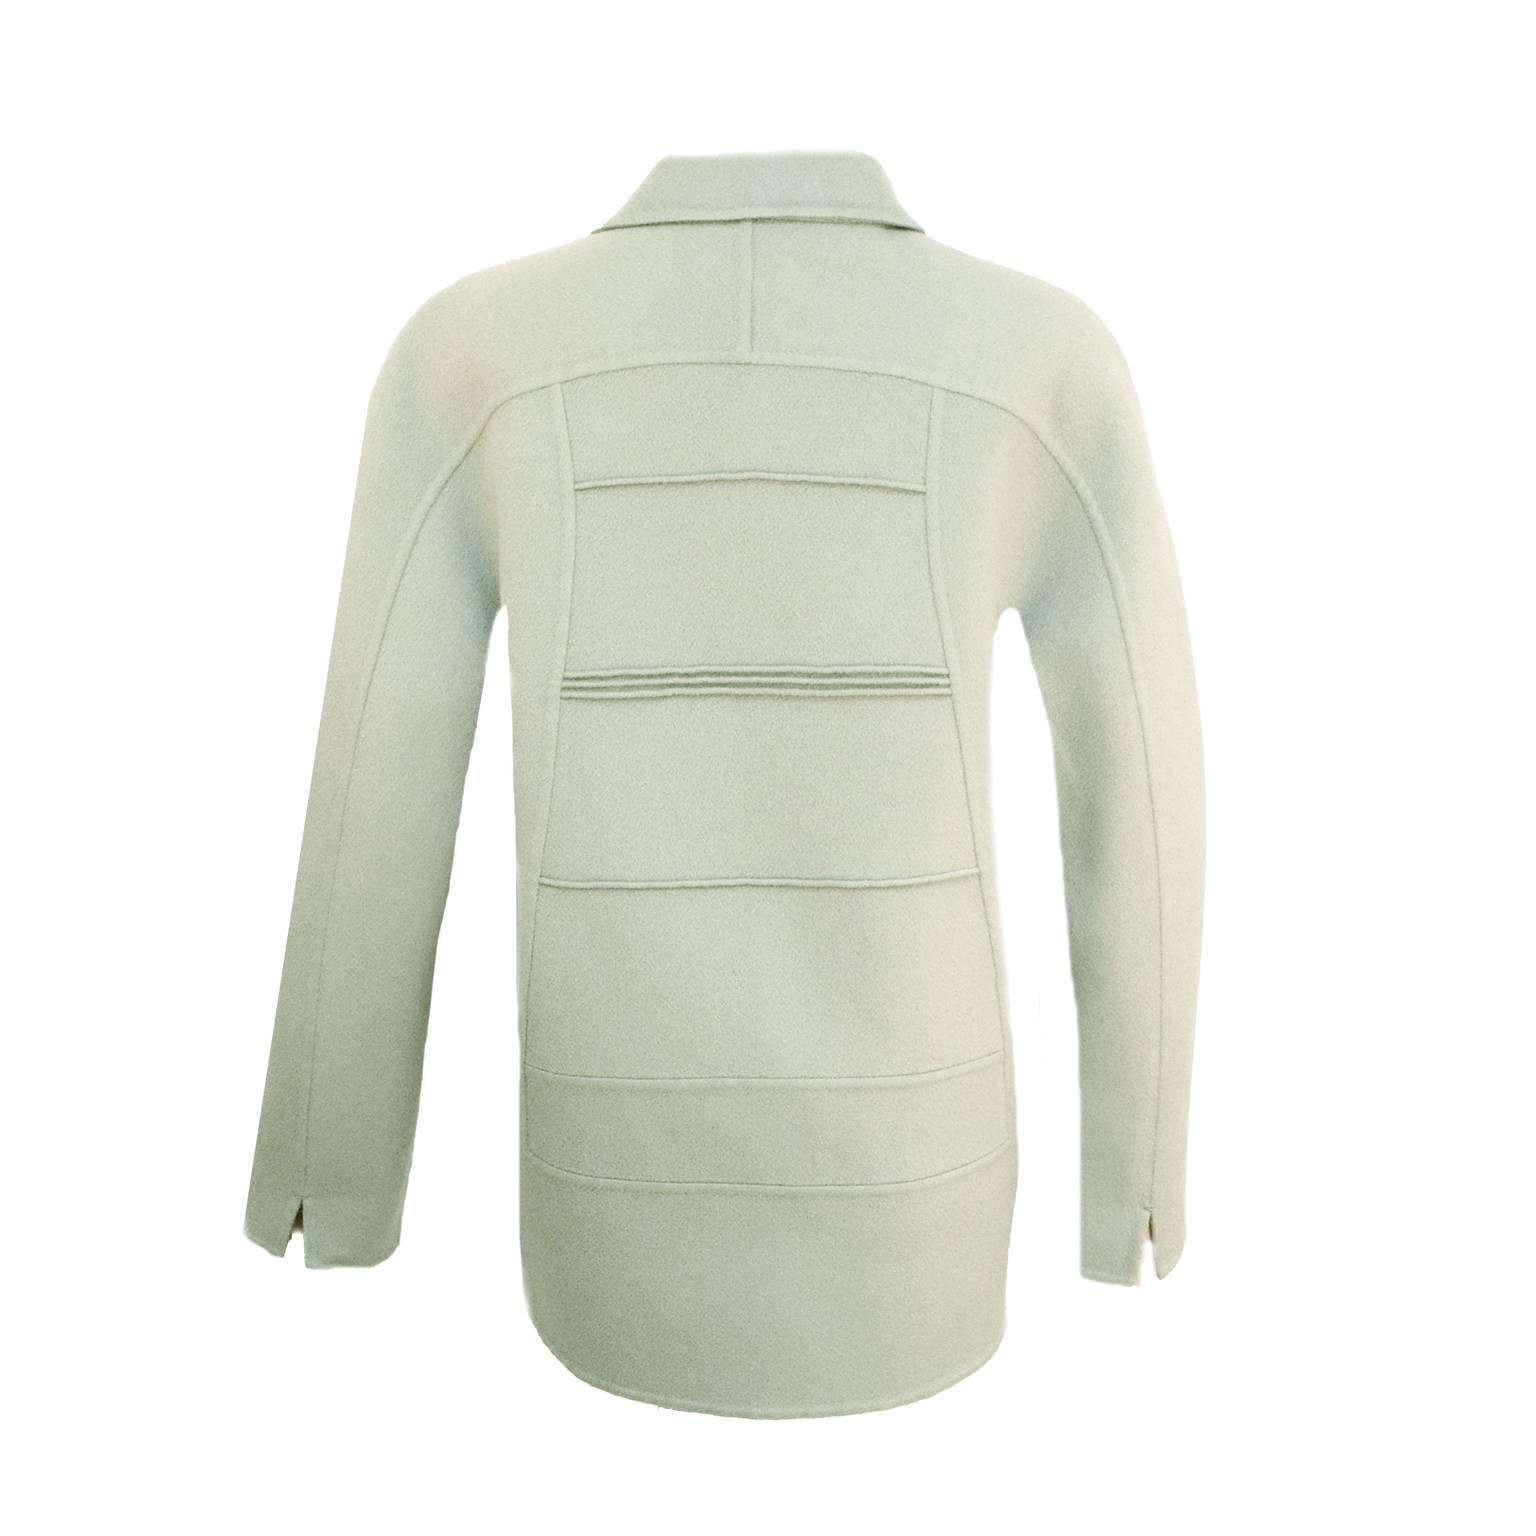 This Chado Ralph Rucci Jacket is single breasted and 100% Cashmere. Piping detailing to add a more structured look across the breastplate down to hipline. This jacket is long sleeved and has side pockets and ivory buttons for the perfect subtle